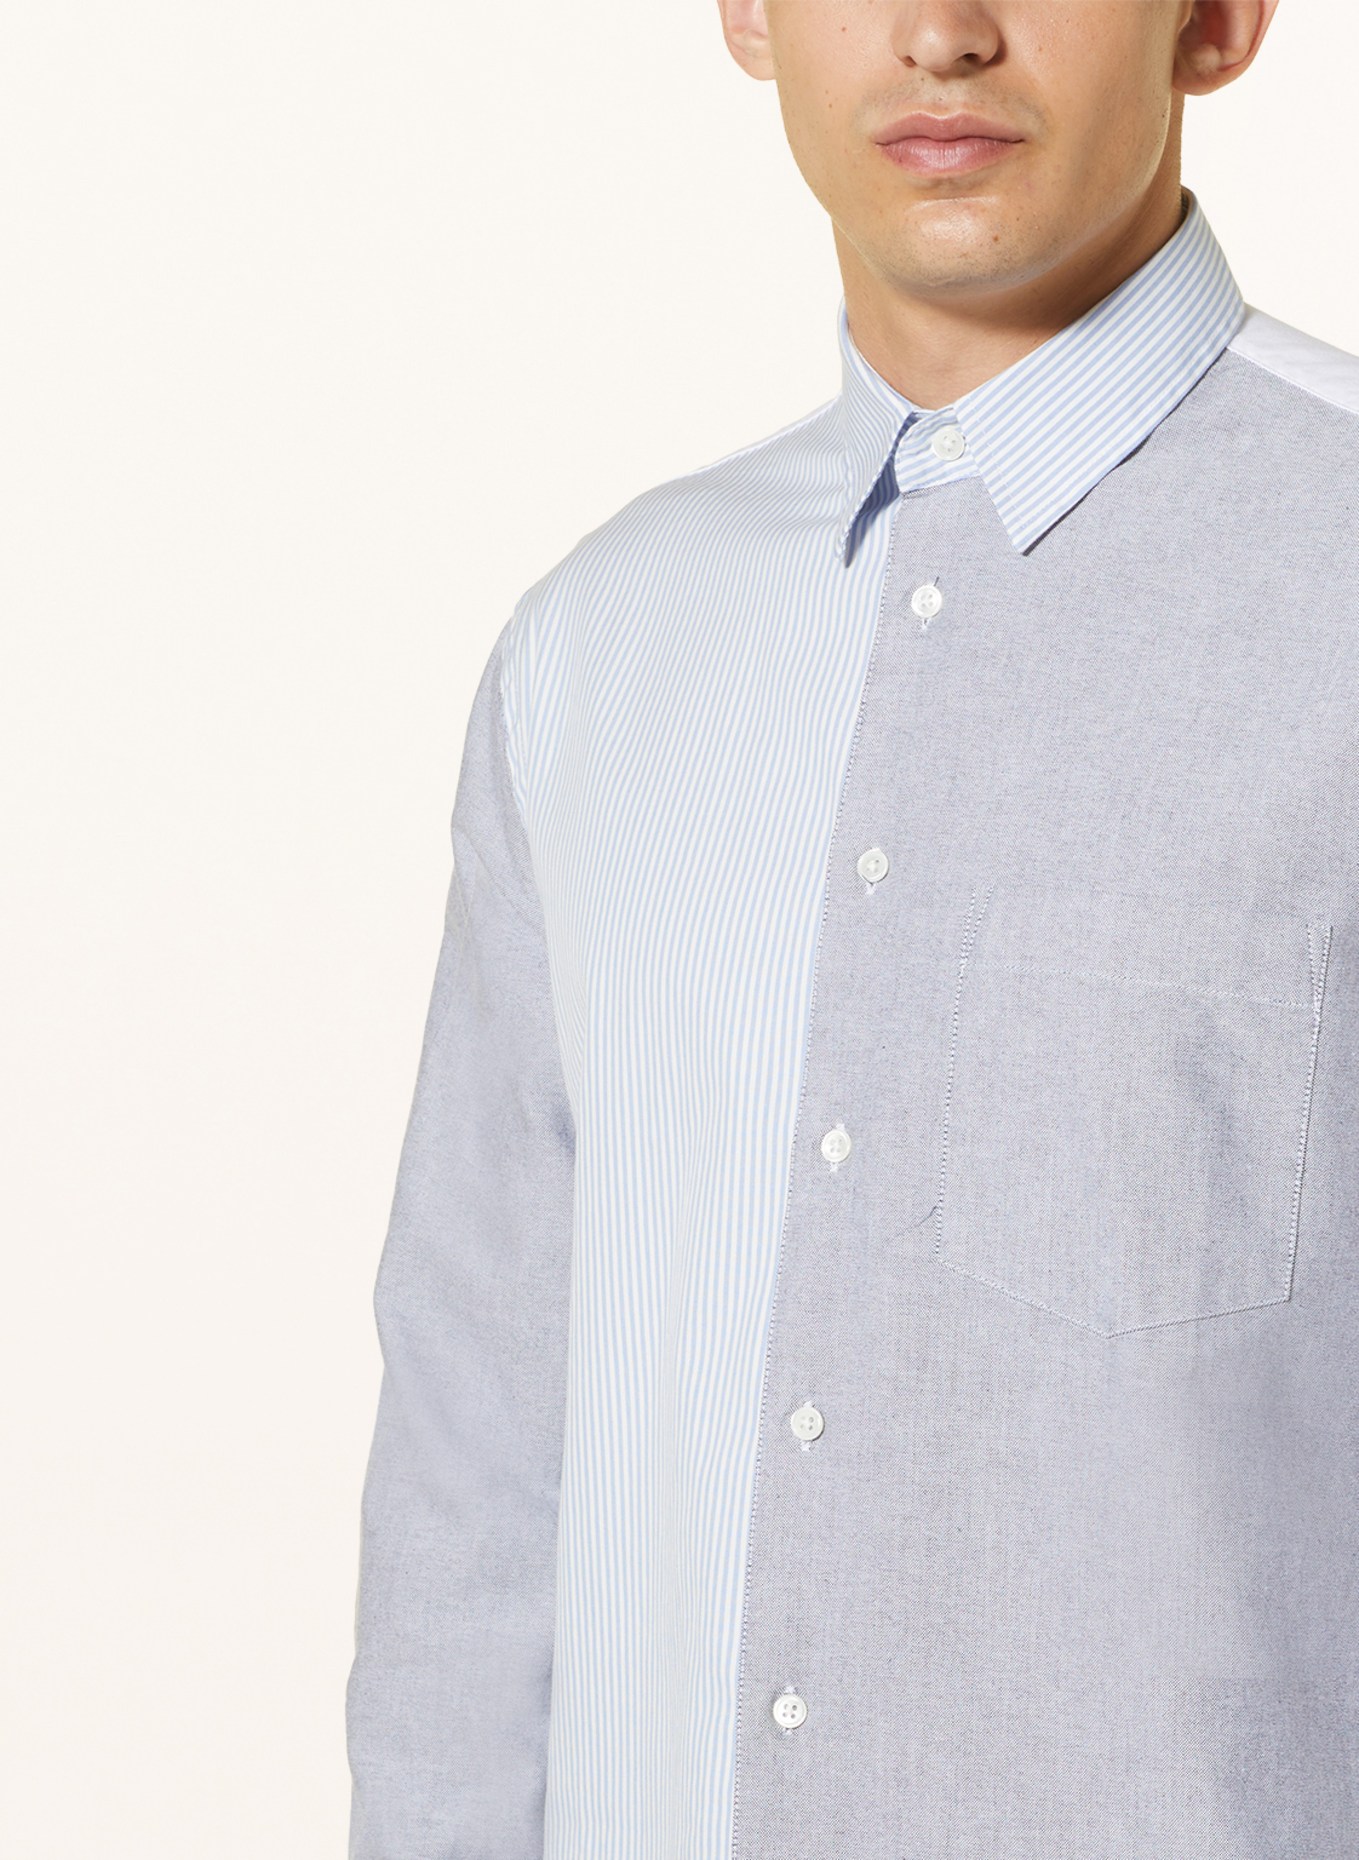 JW ANDERSON Shirt classic fit, Color: LIGHT BLUE/ GRAY/ WHITE (Image 5)